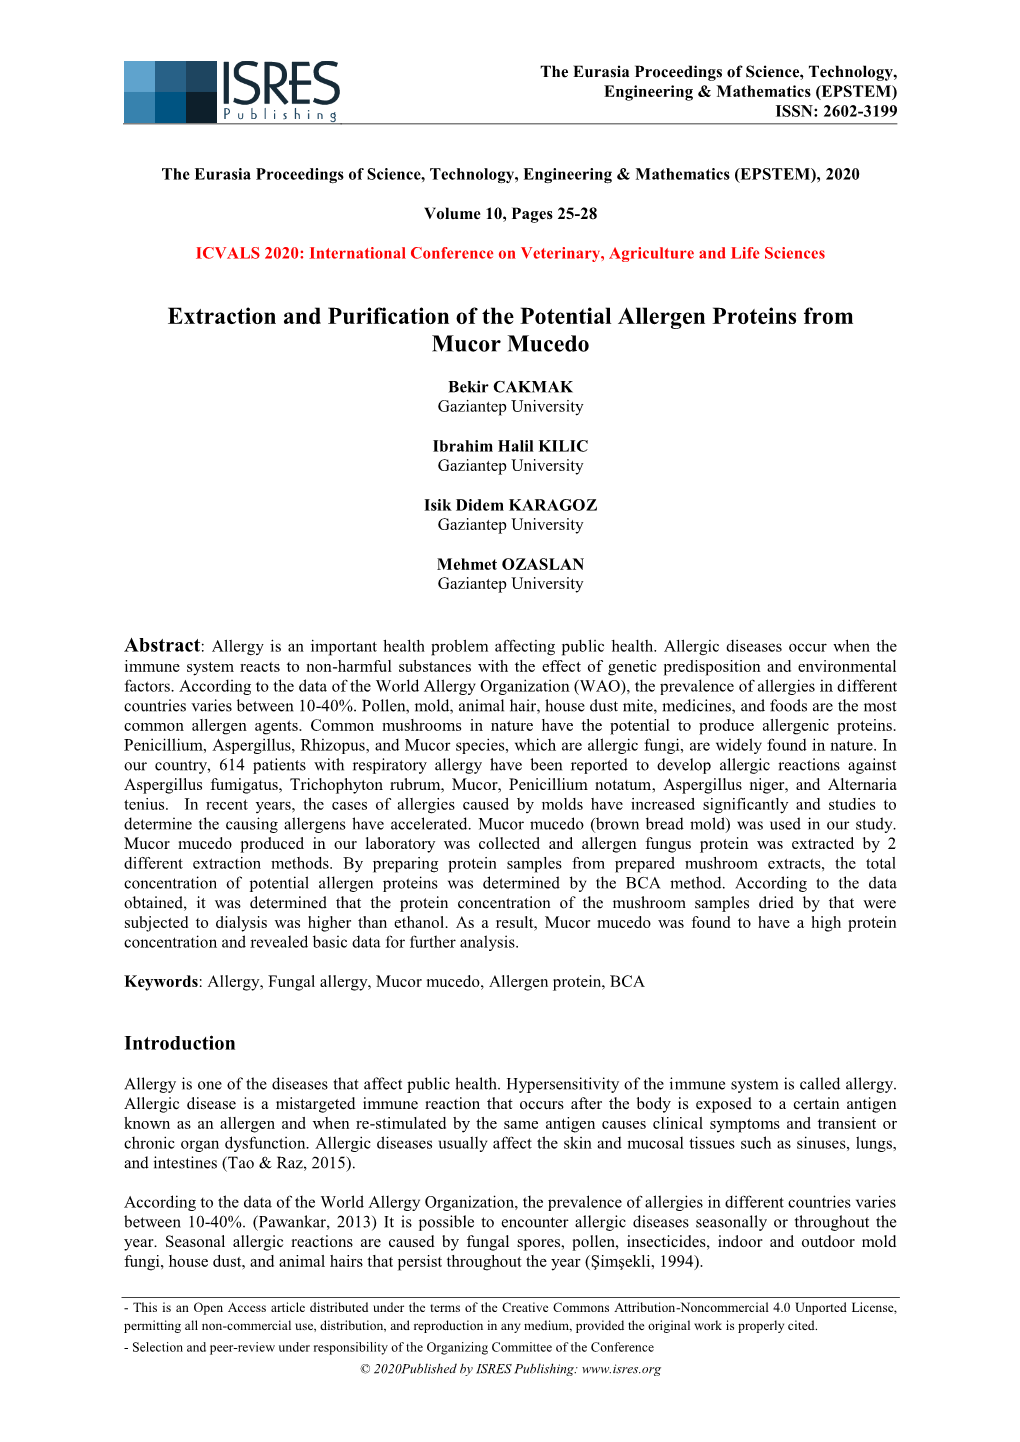 Extraction and Purification of the Potential Allergen Proteins from Mucor Mucedo